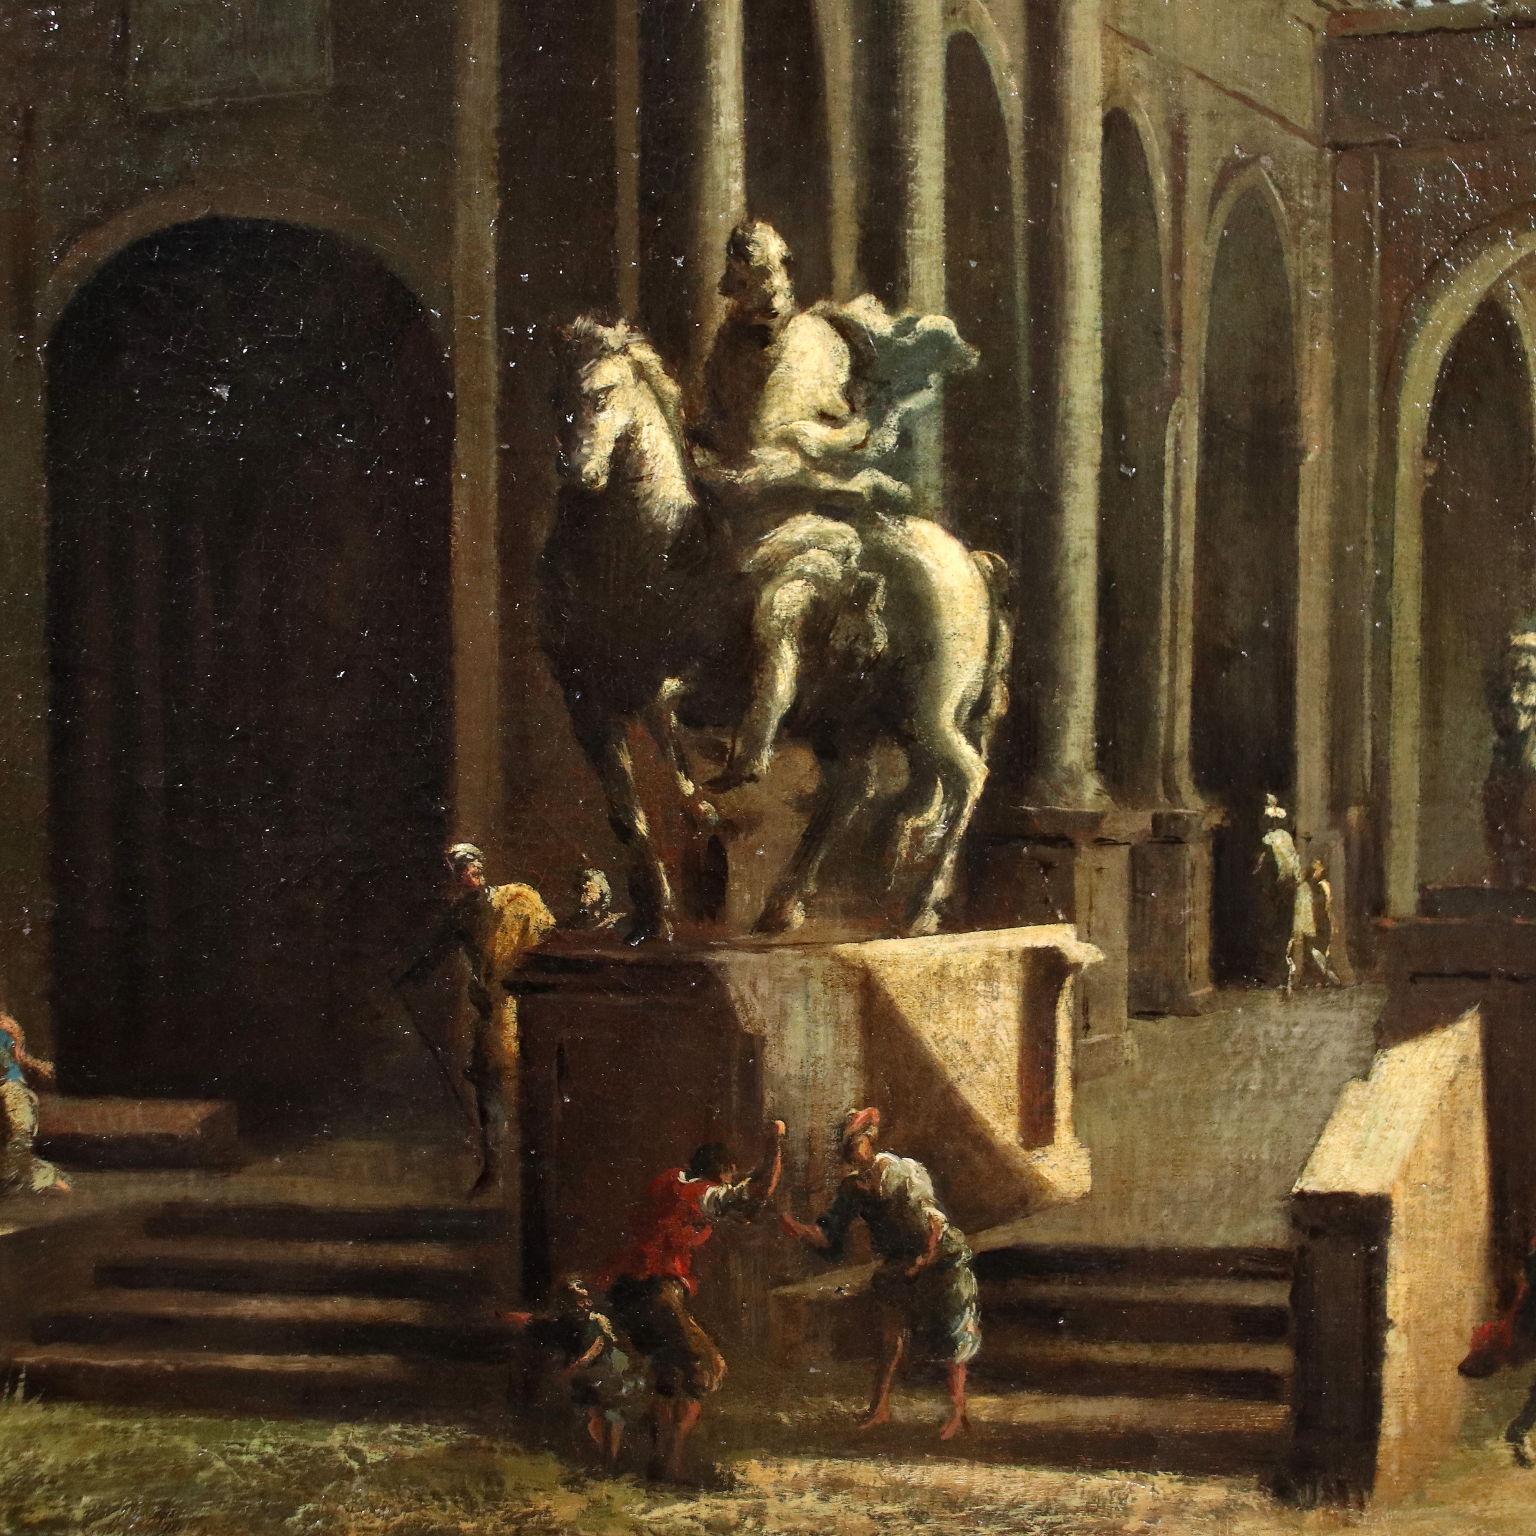 Architectural Capriccio with Figures, XVIIIth century - Other Art Style Painting by Unknown